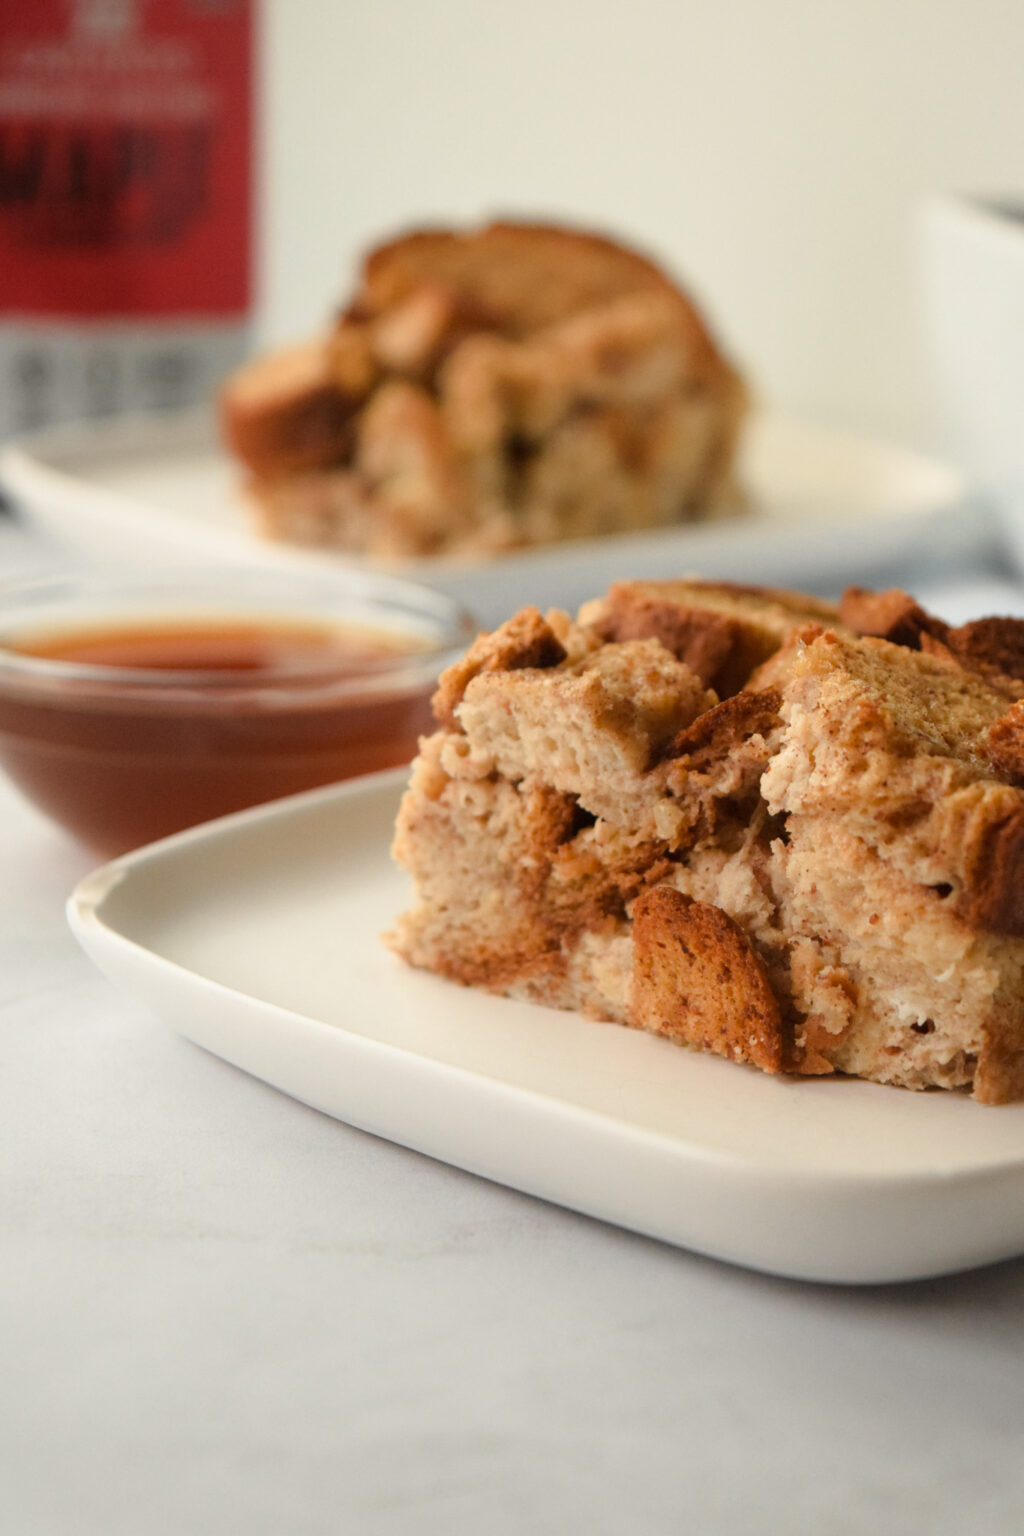 Plate with Gluten Free French Toast Casserole